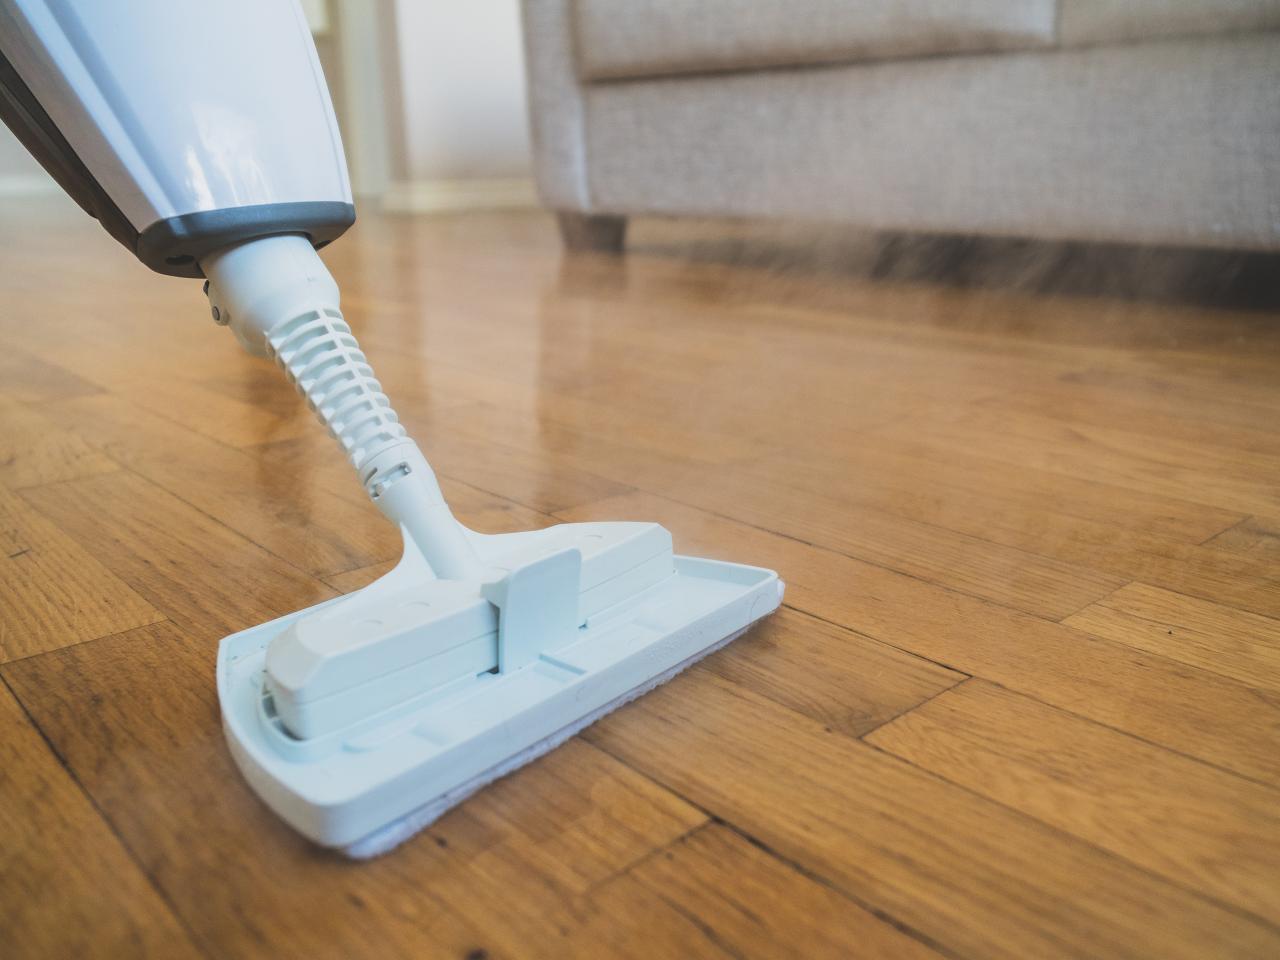 Cleaning Laminate Floors With Steam Mop, Steam Mop For Laminate Wood Floors